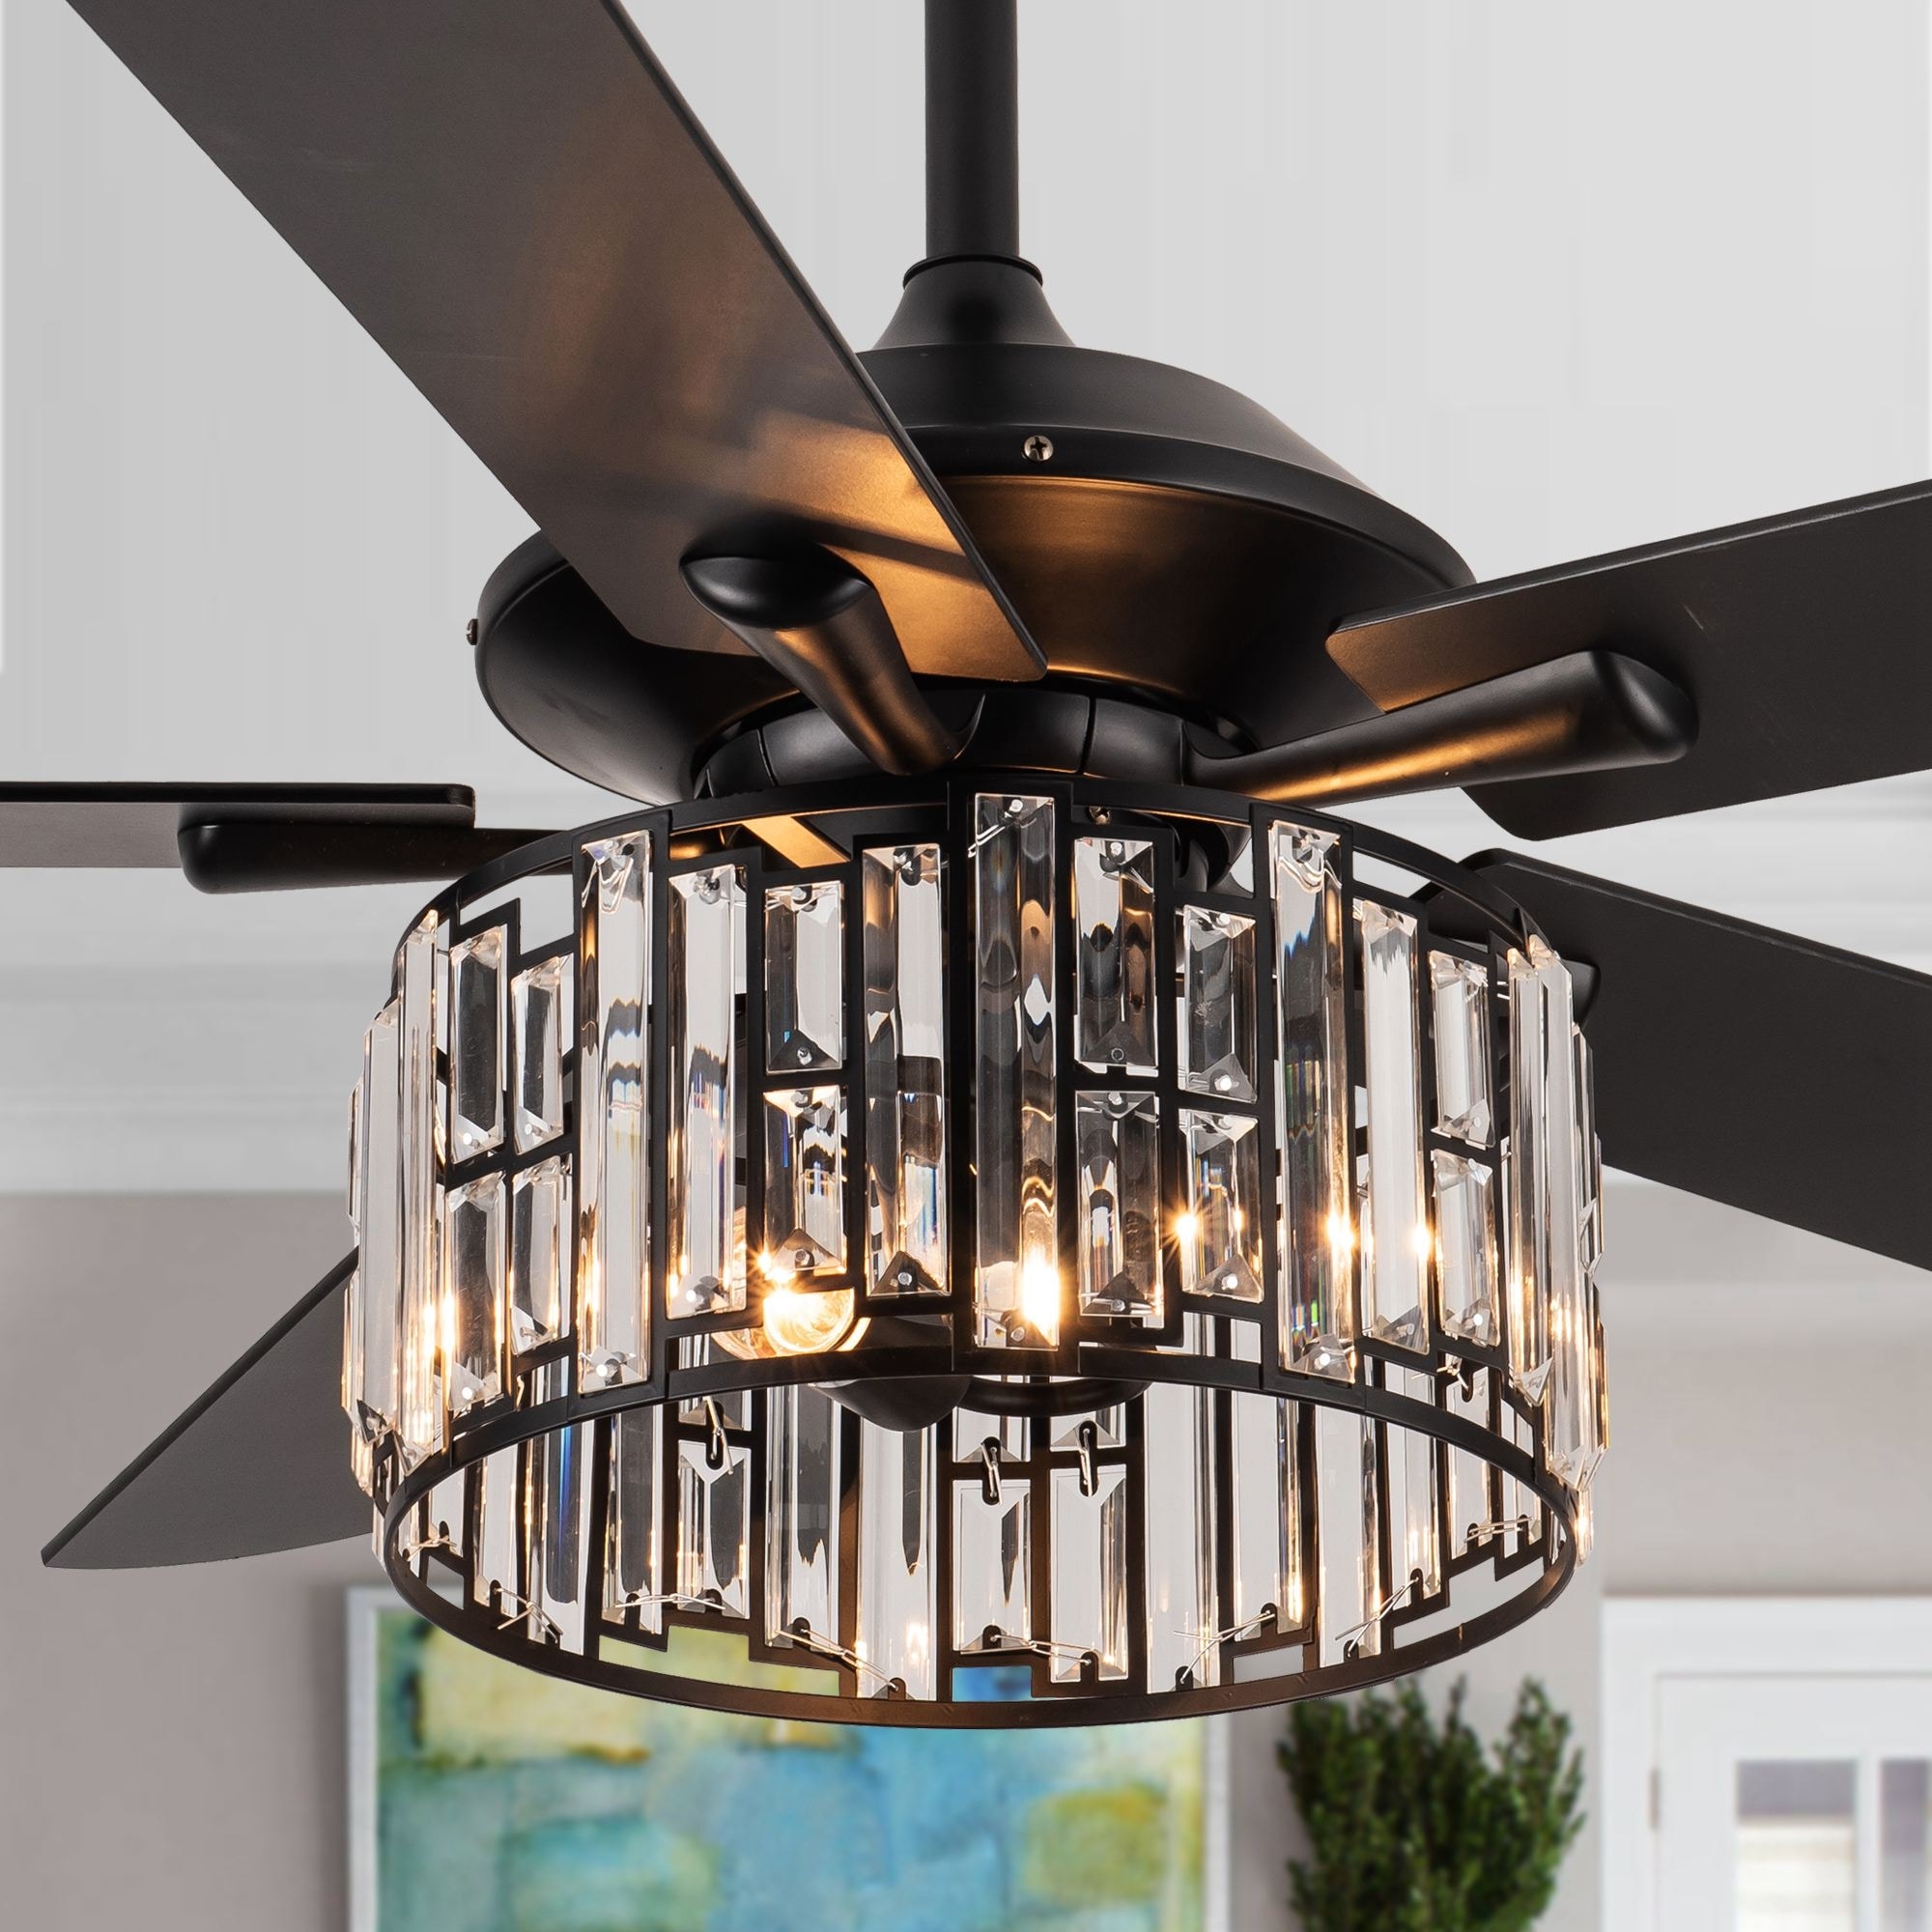 5 - Black Blade Clear Crystal Ceiling Fan with Remote Control for Living  Room